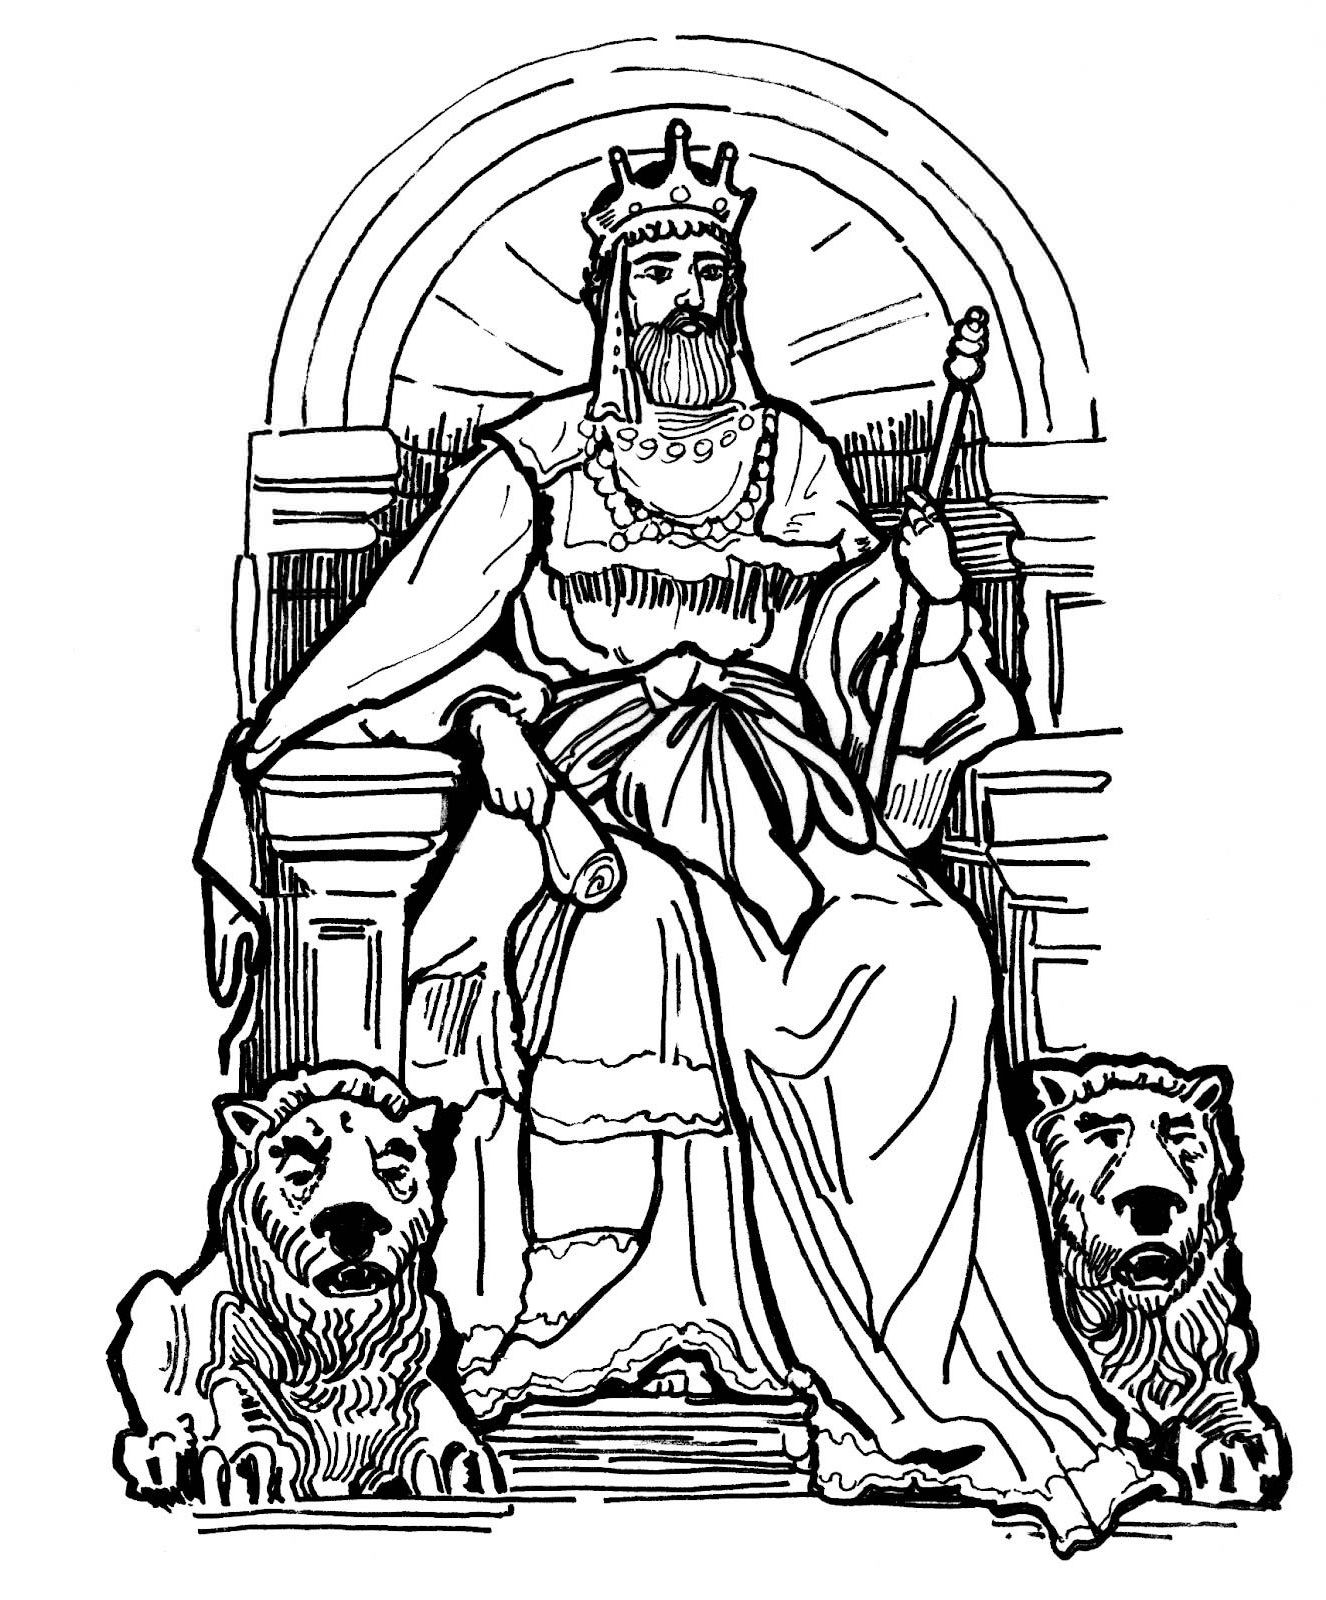 Related image churtch in. King clipart throne sketch